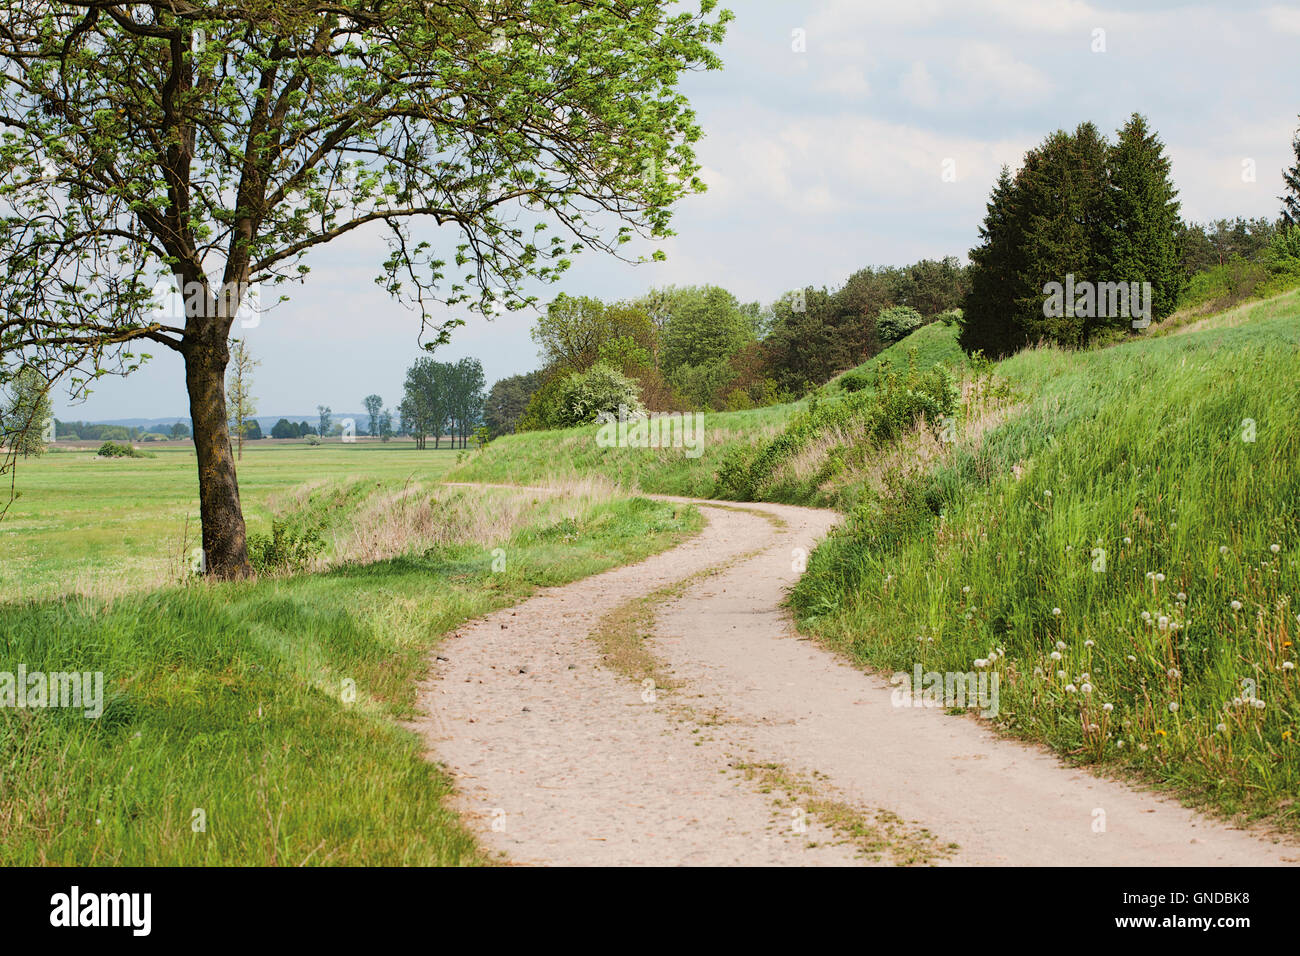 country ground winding road or rural beautiful landscape Stock Photo